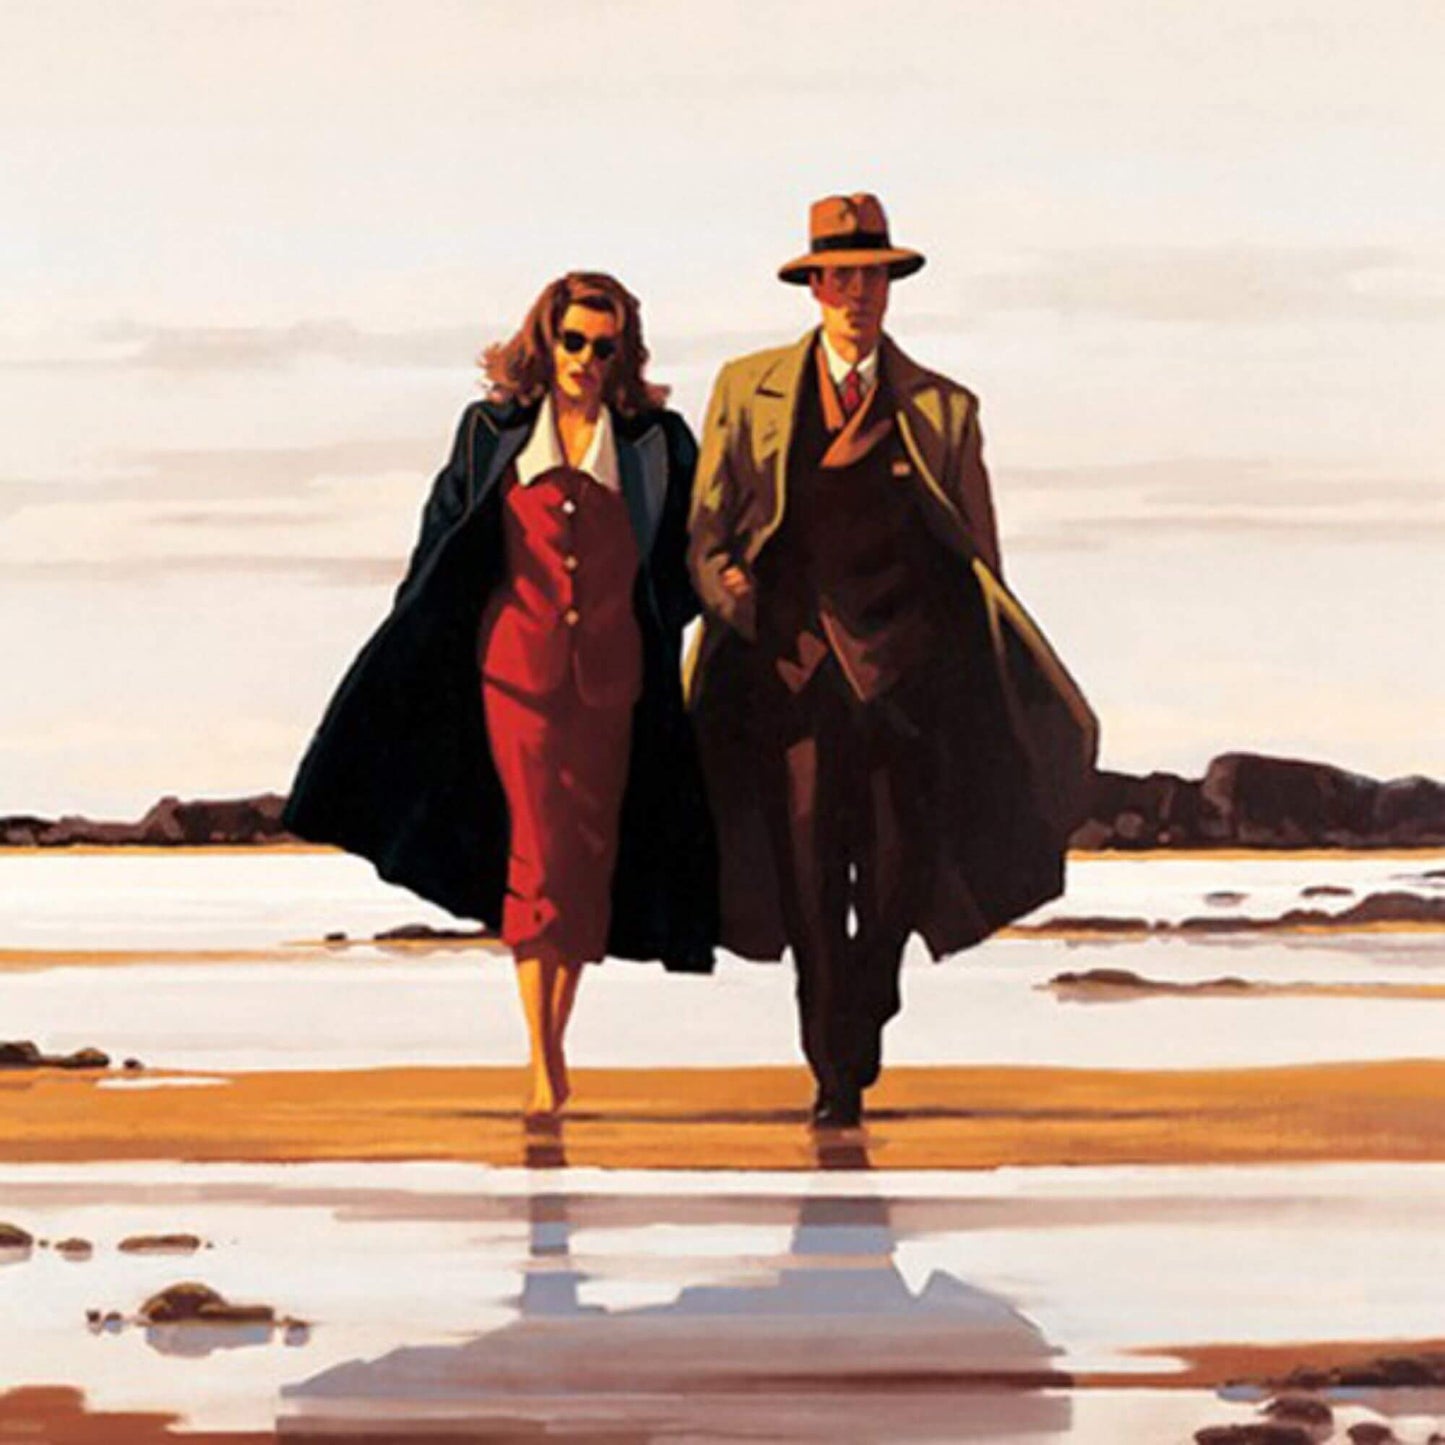 The Road To Nowhere by Jack Vettriano